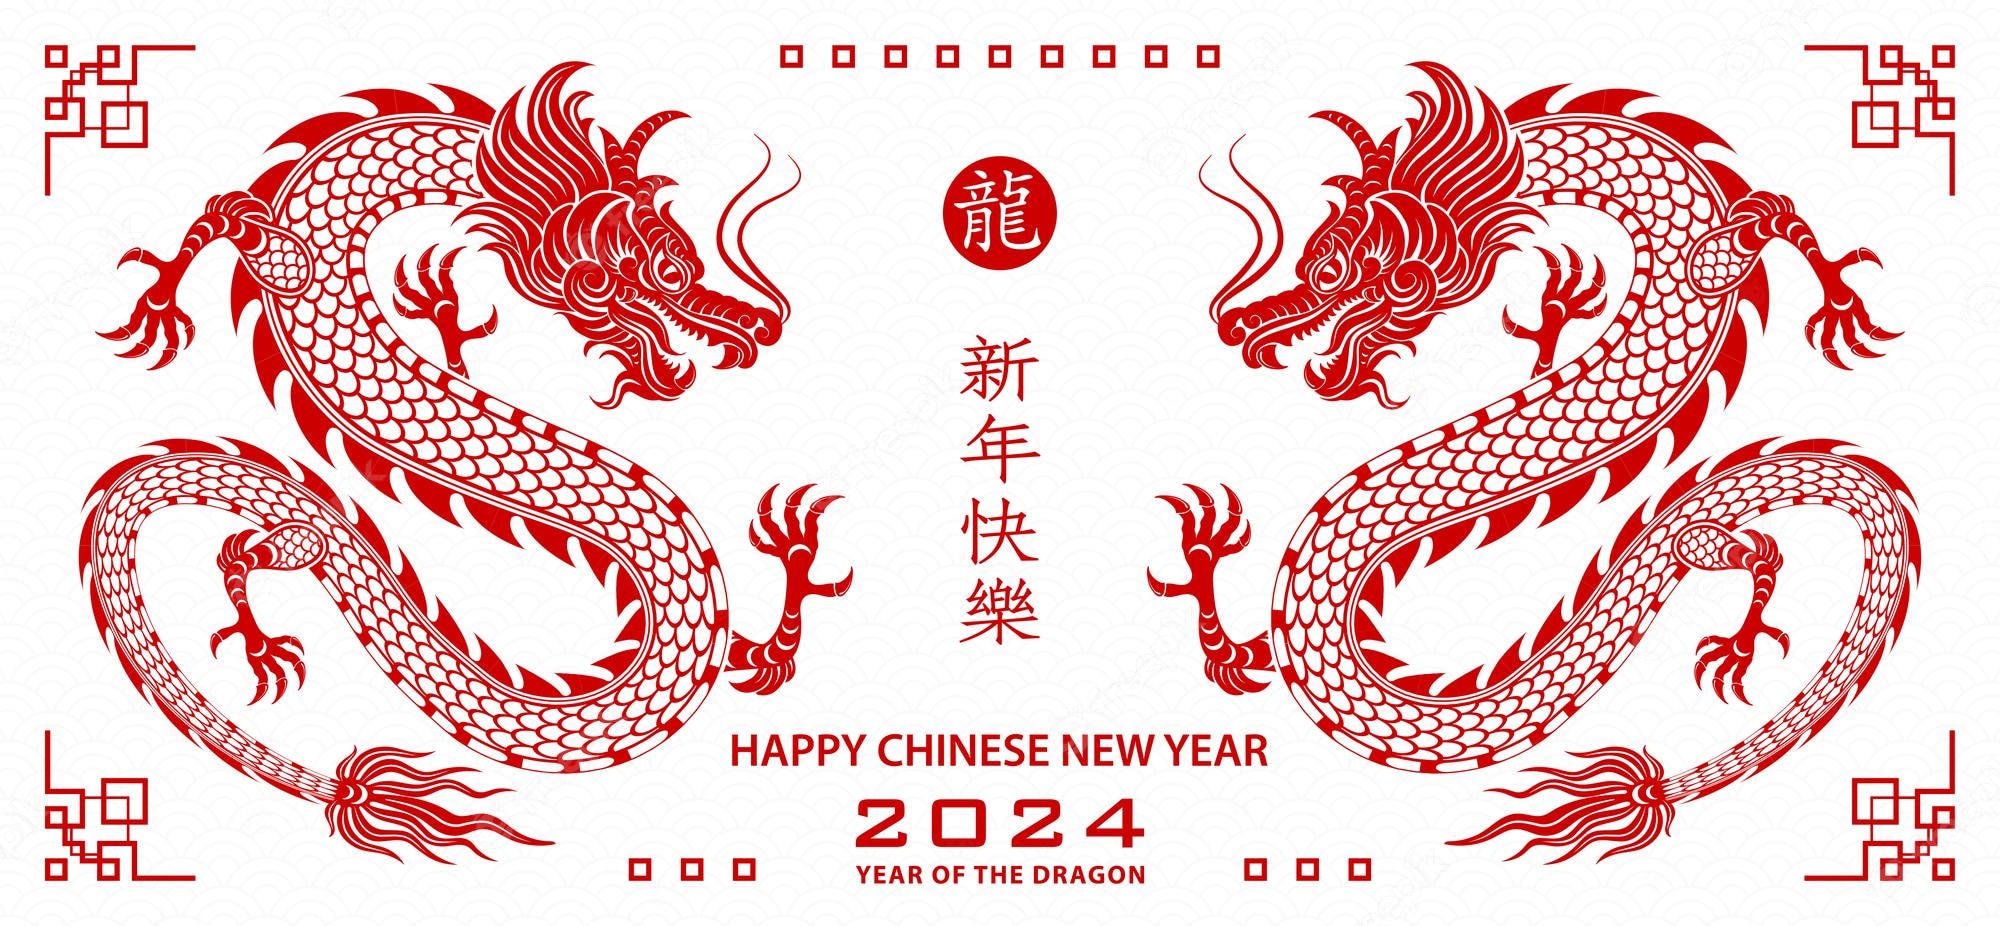 Premium Vector. Happy chinese new year 2024 zodiac sign for year of the dragon